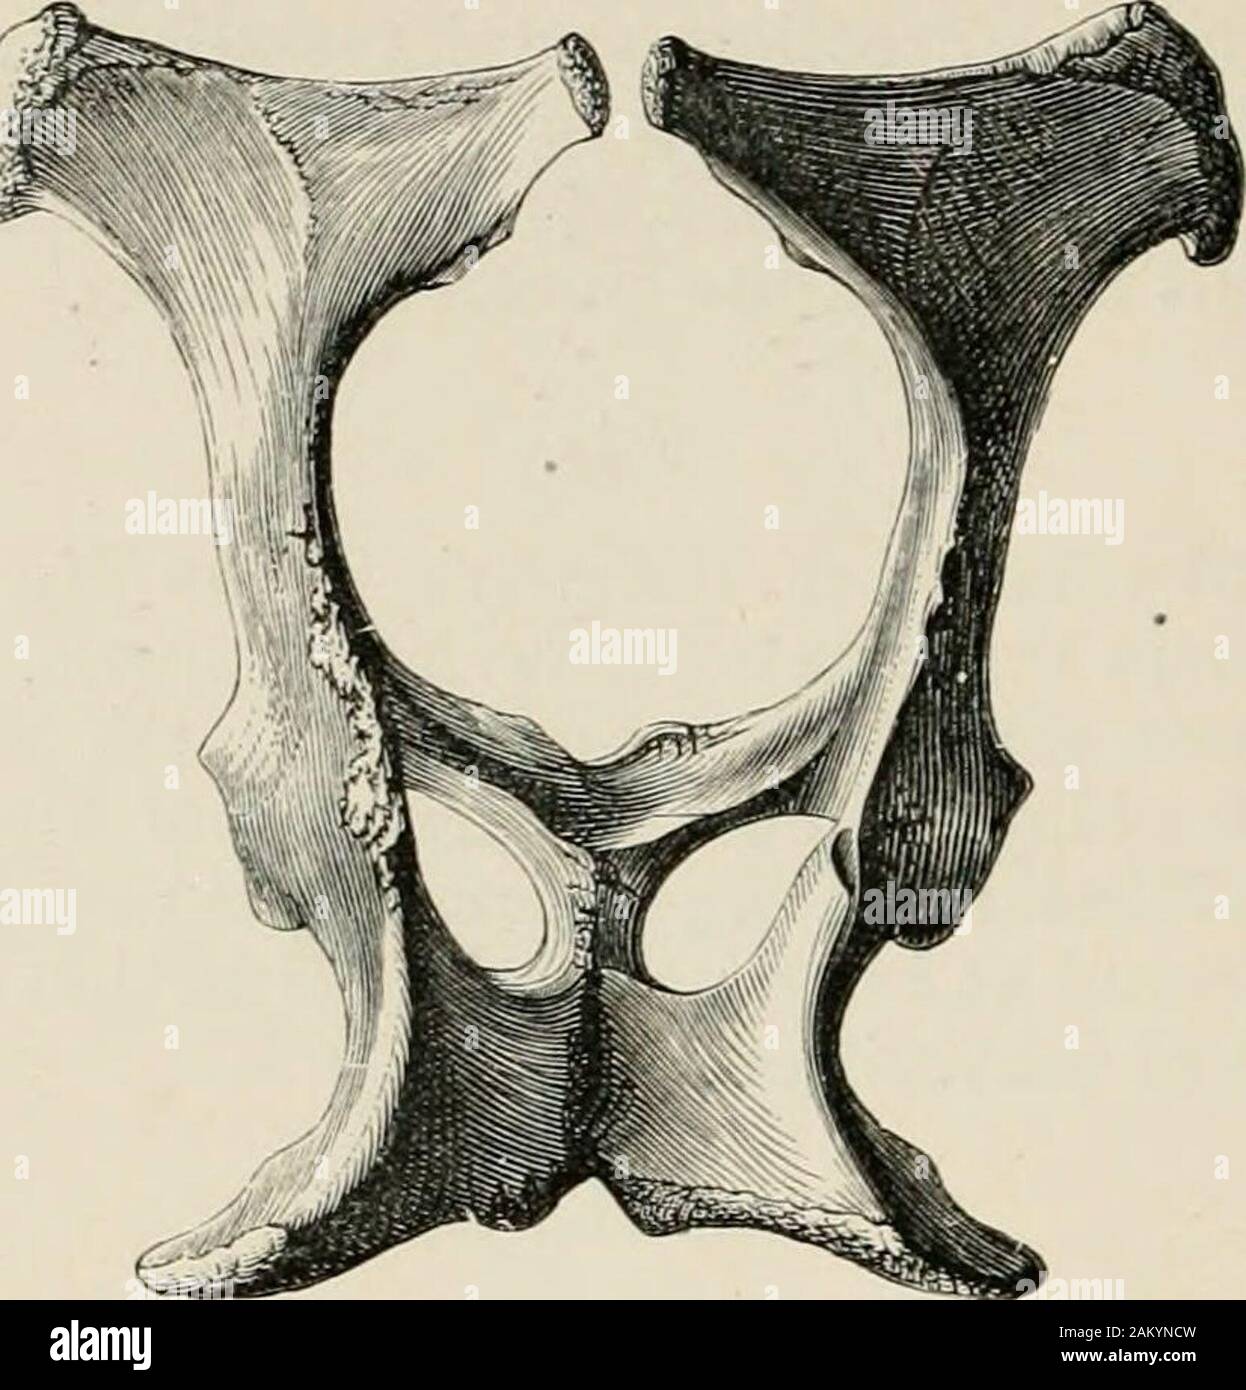 A text-book of veterinary obstetrics : including the diseases and accidents incidental to pregnancy, parturition and early age in the domesticated animals . der than that of theHorse, the inlet is nmch larger, the ilio-pectineal crests are furtherapart, and the distance between the lower face of the sacrum and theanterior border of the pubis is much greater, the ilia and pubis beingbroader and more concave. On the upper surface of the Mares pelvis,the sacro-sciatic notches are very deep ; the inner border of the iliumforms a very concave line, and the ischiatic spines are widely separated.The Stock Photo